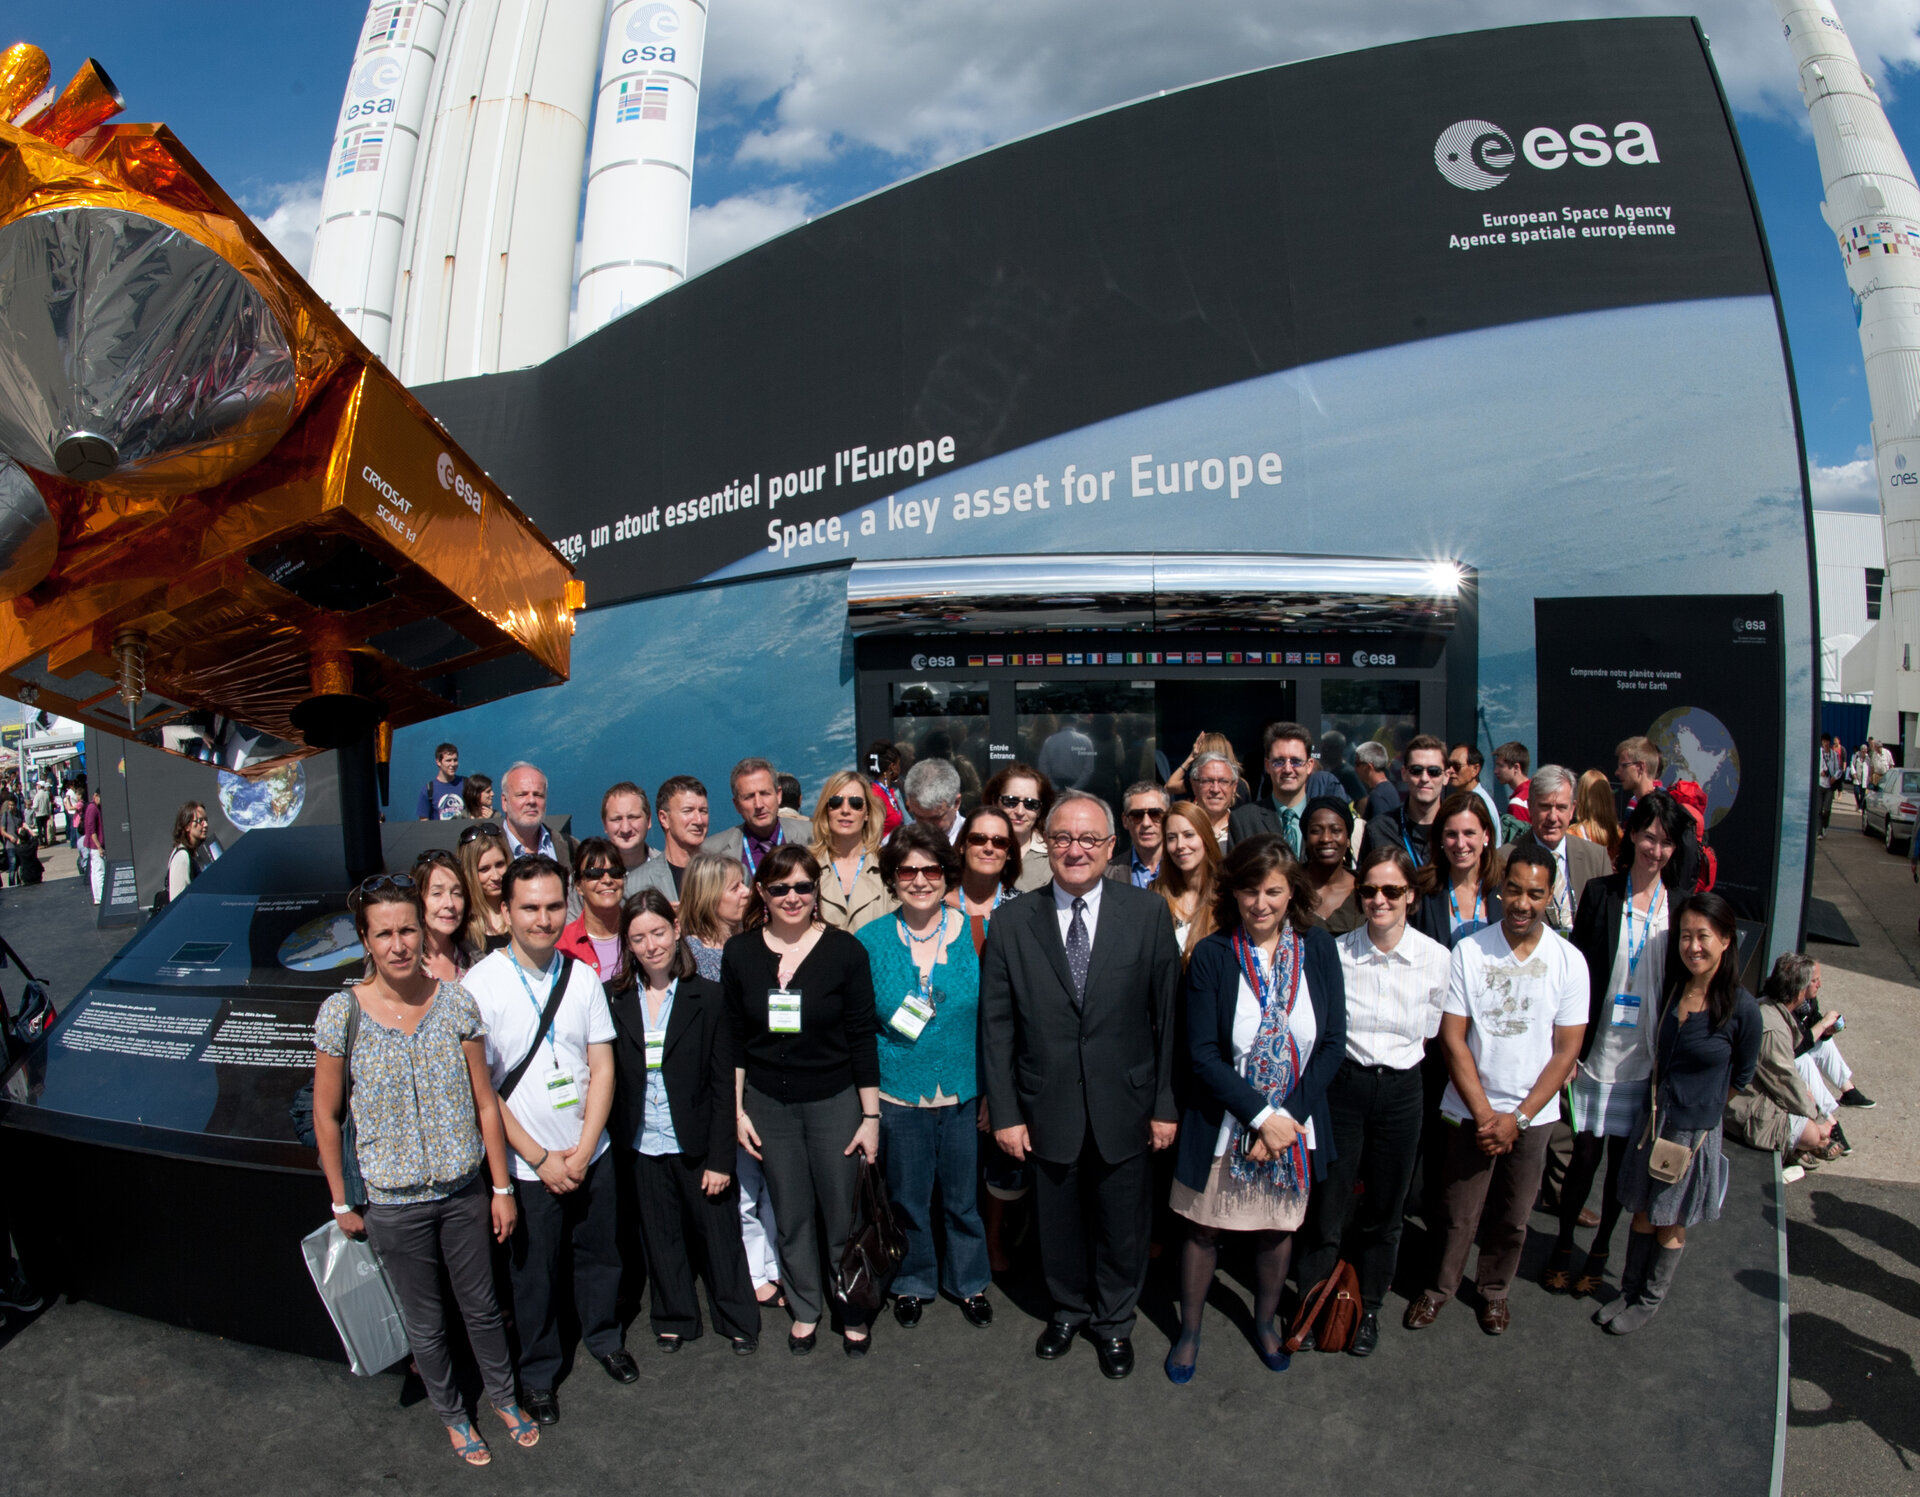 Jean-Jacques Dordain and ESA staffs in front of the ESA pavilion